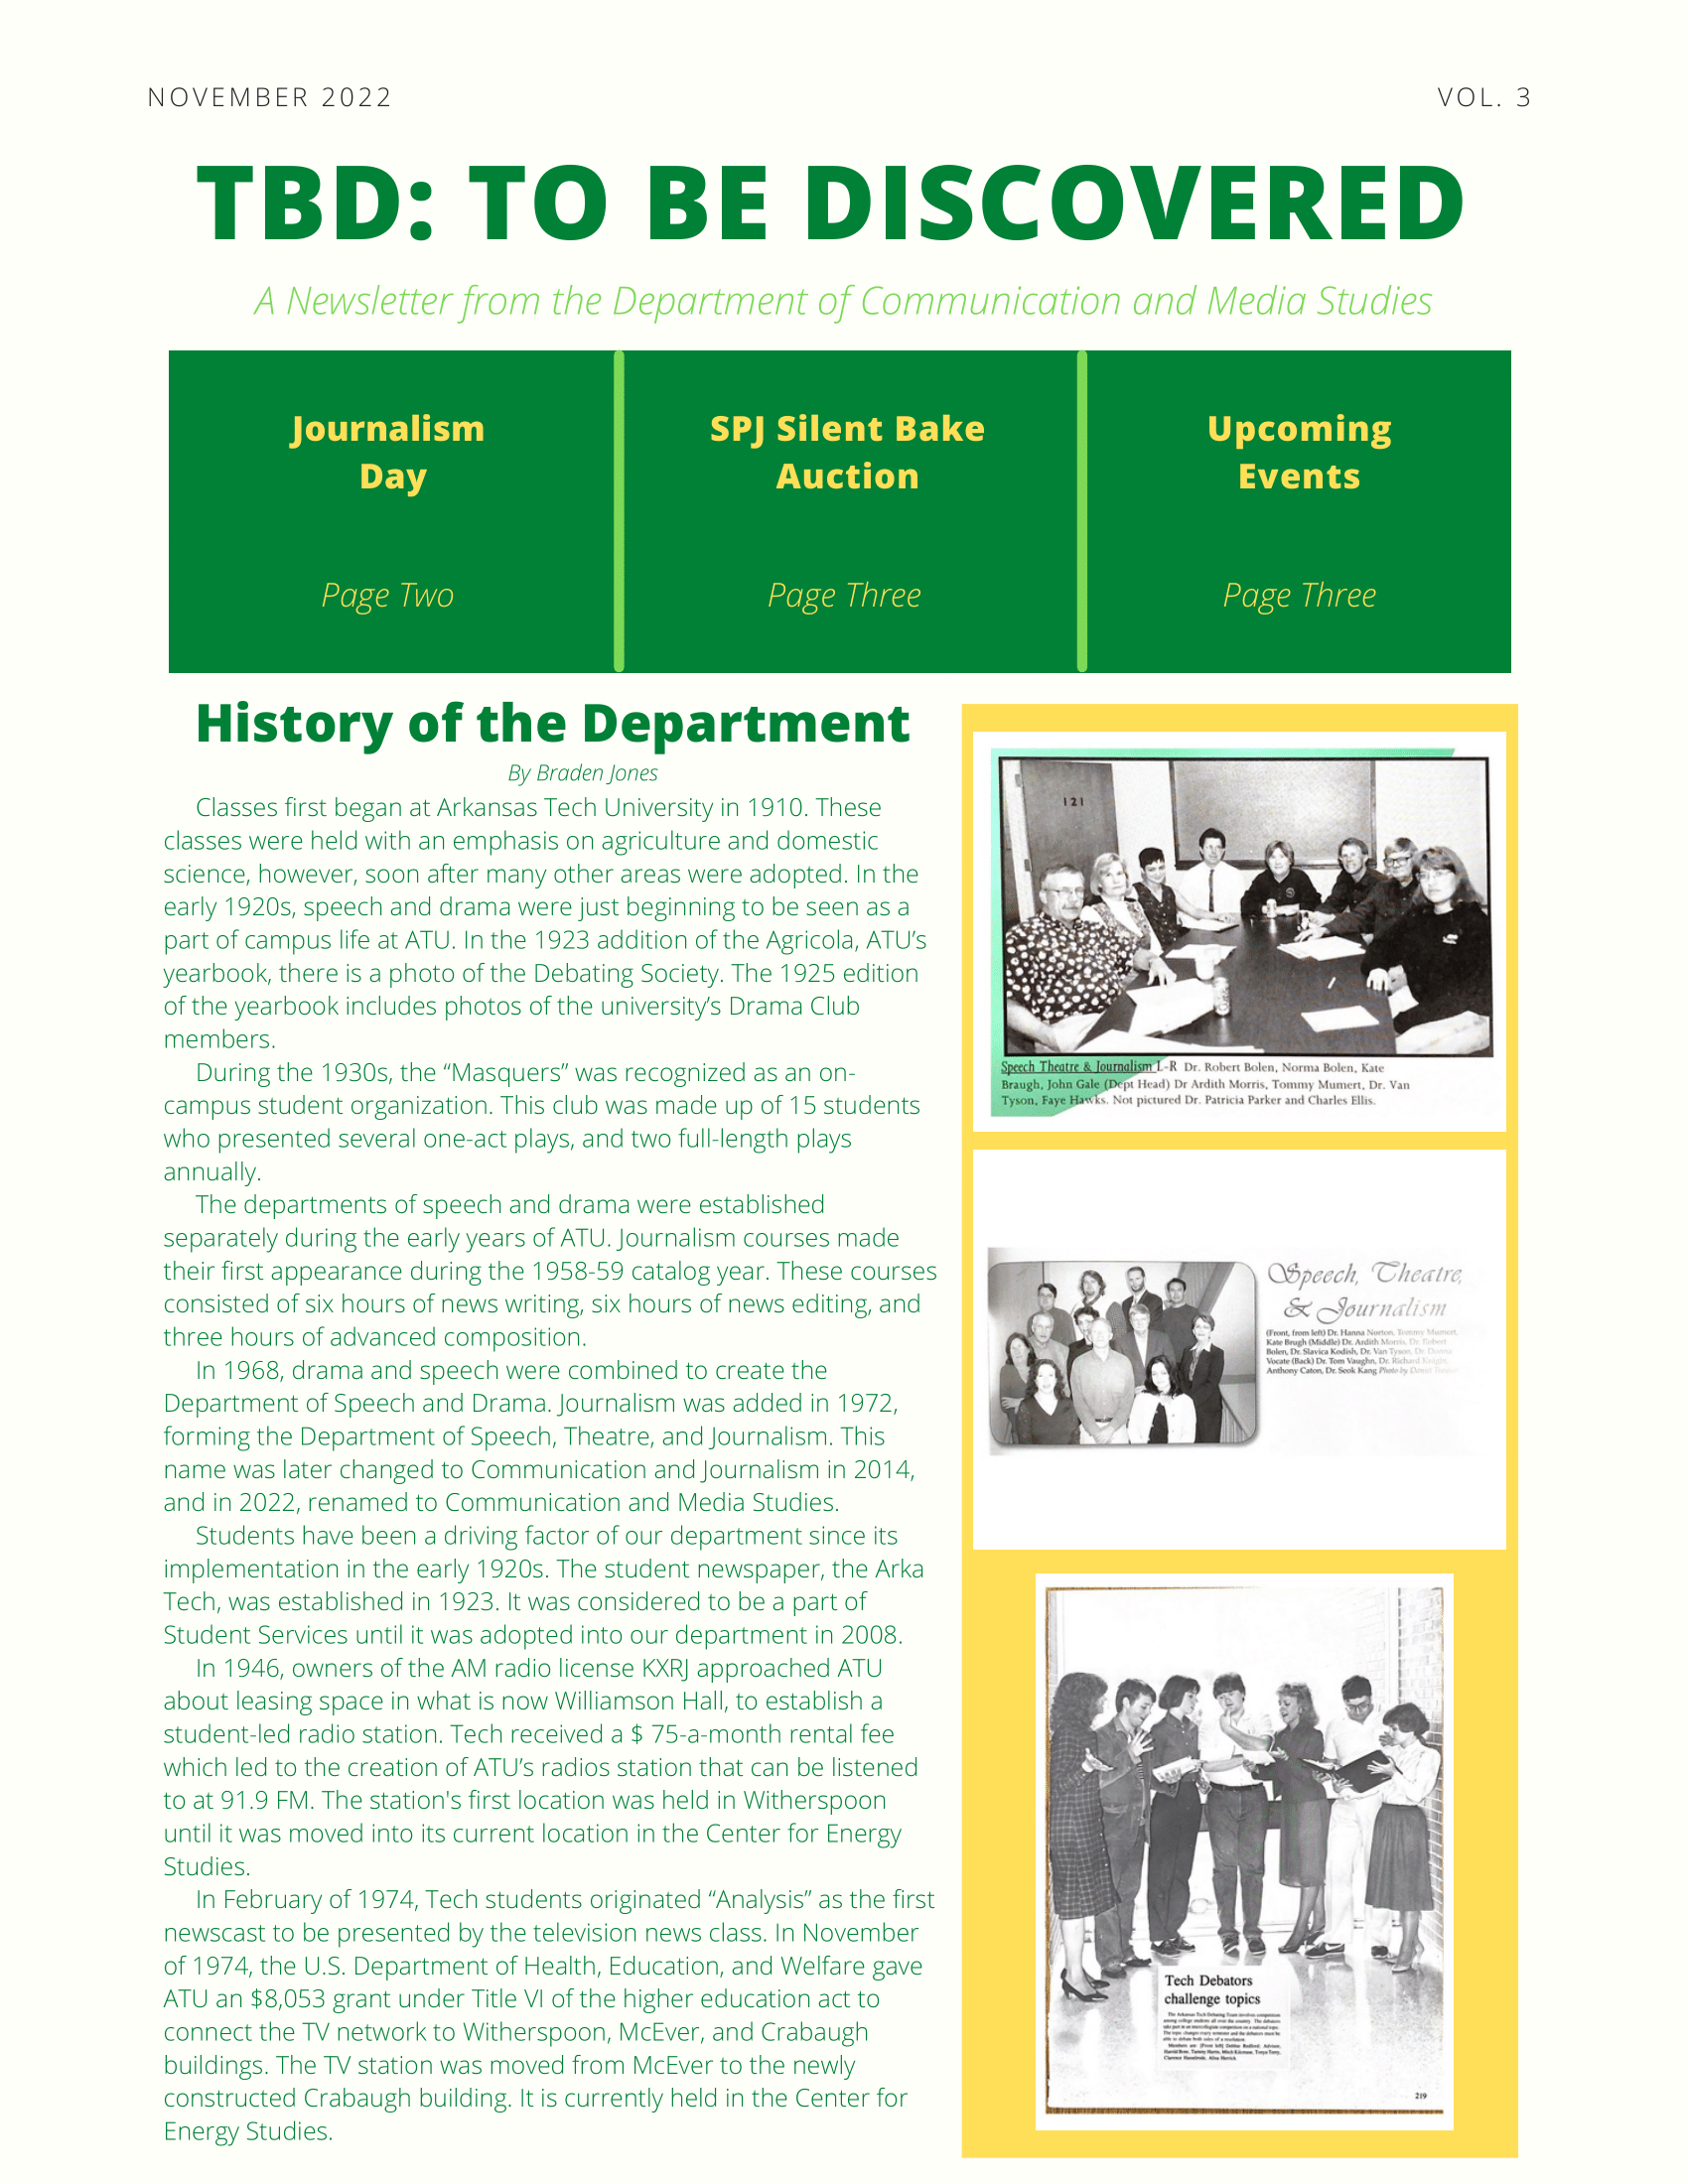 TBD Newsletter Page 1